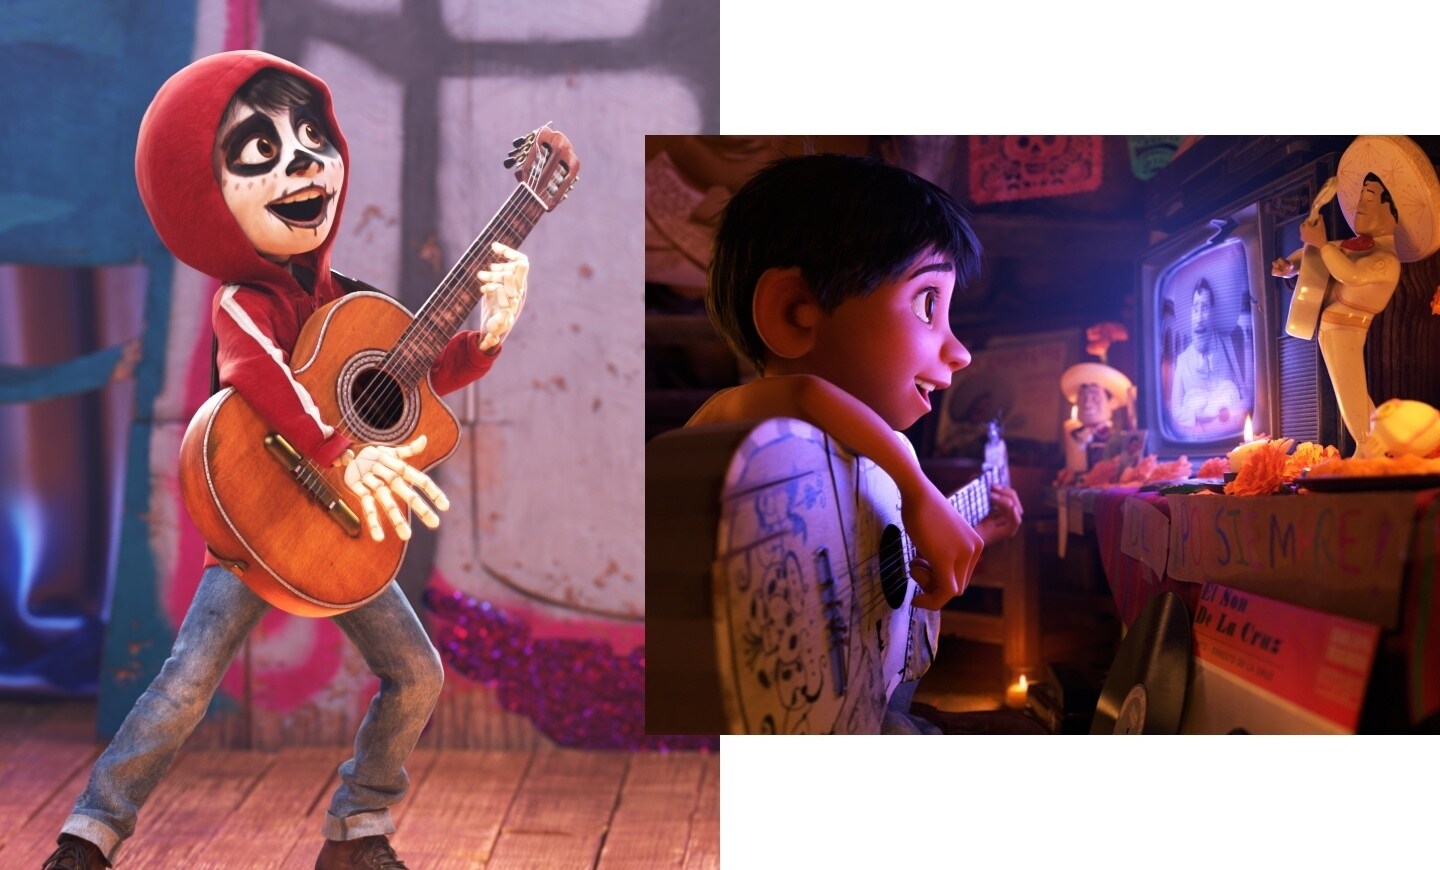 Disney Pixar's Coco | 7 Things You Didn't Know About Coco